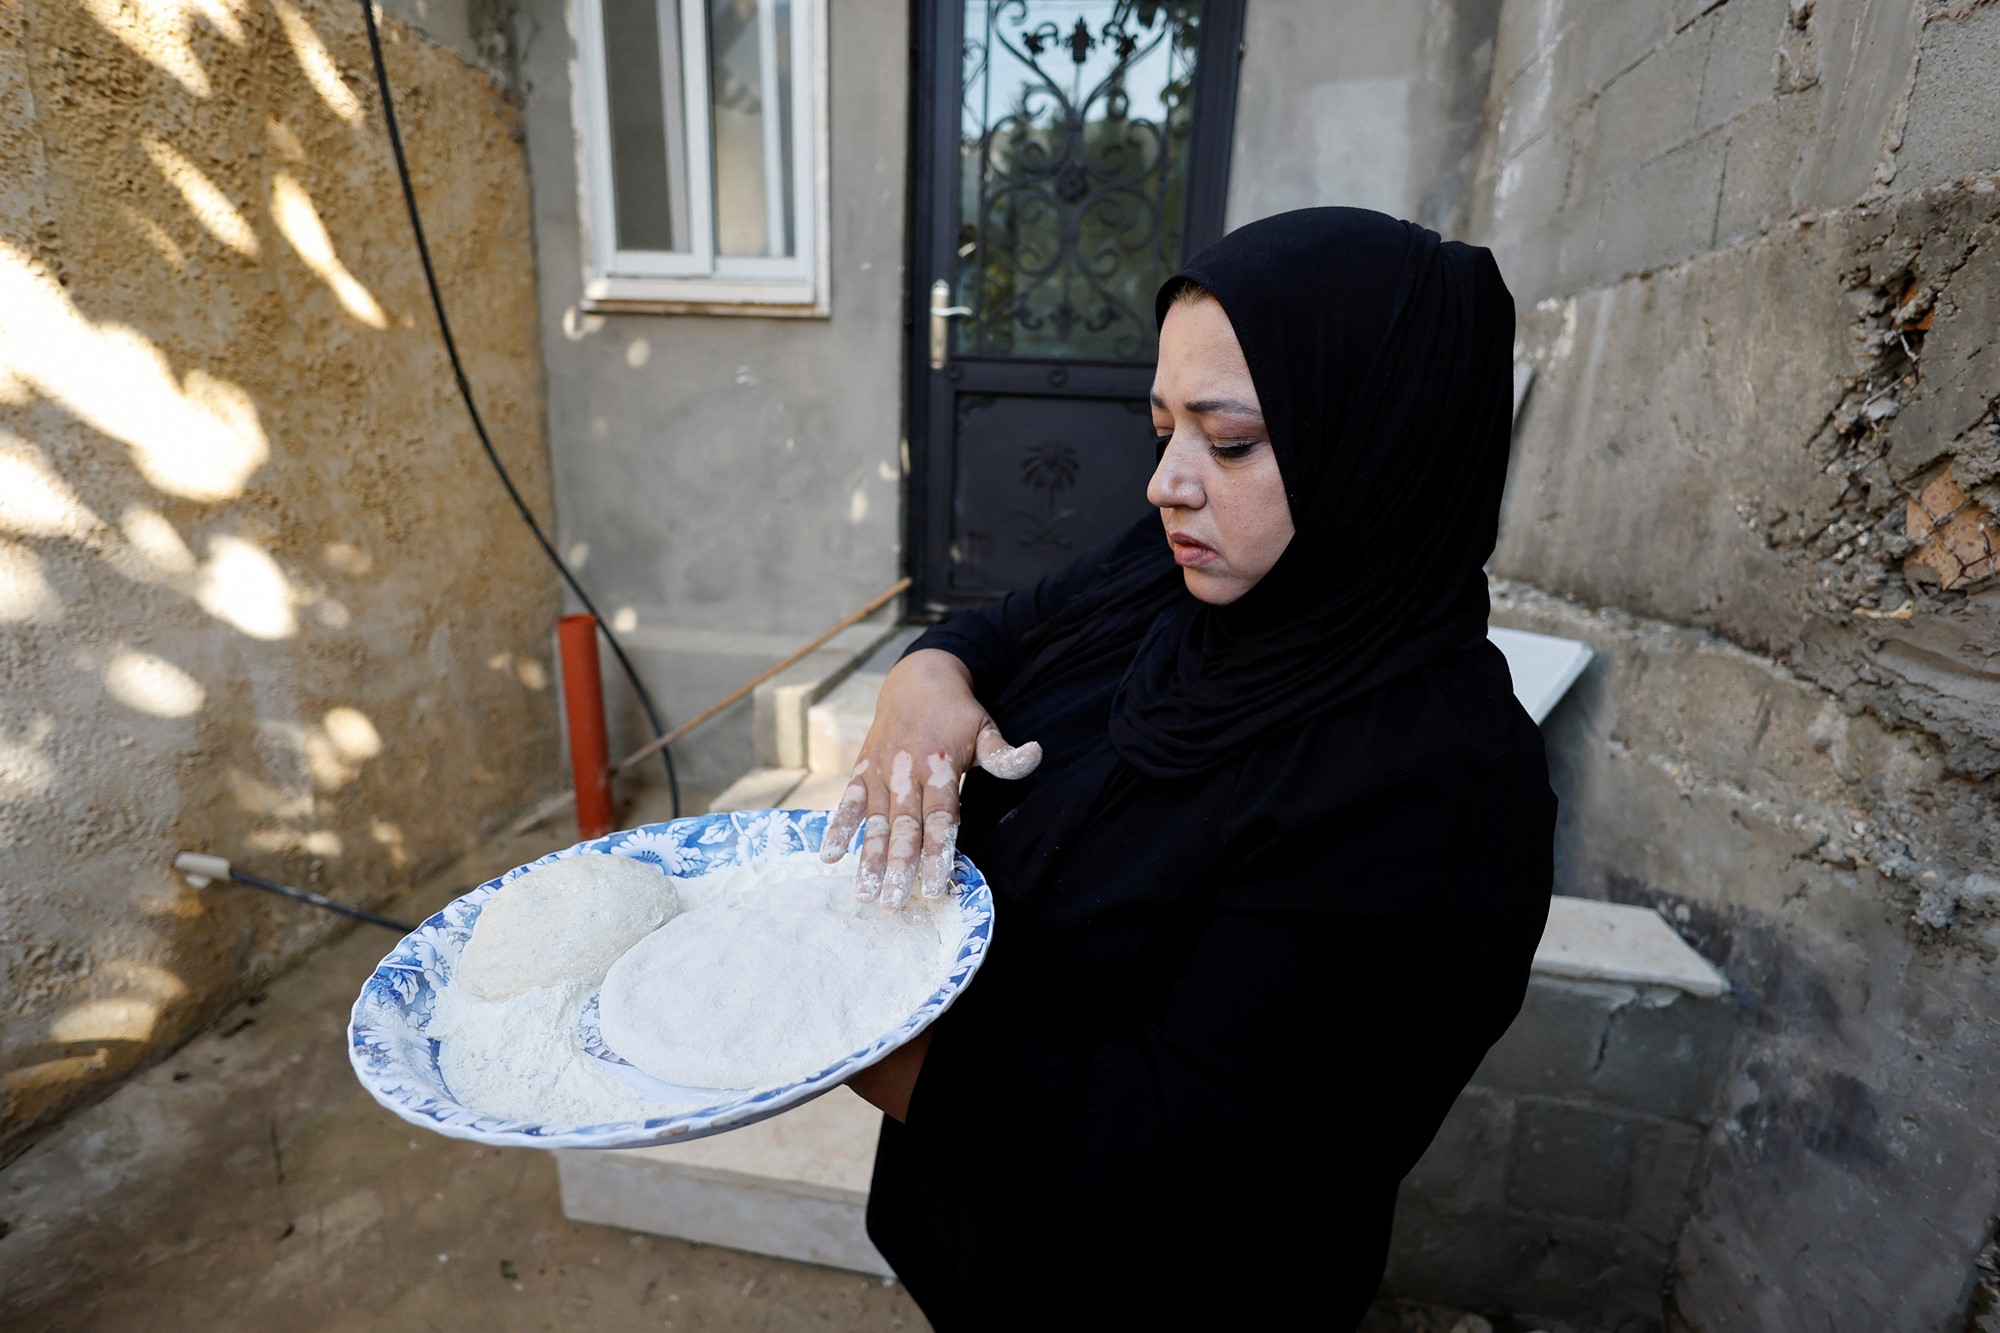 a woman wearing black holding a blue plate with dough on top of it